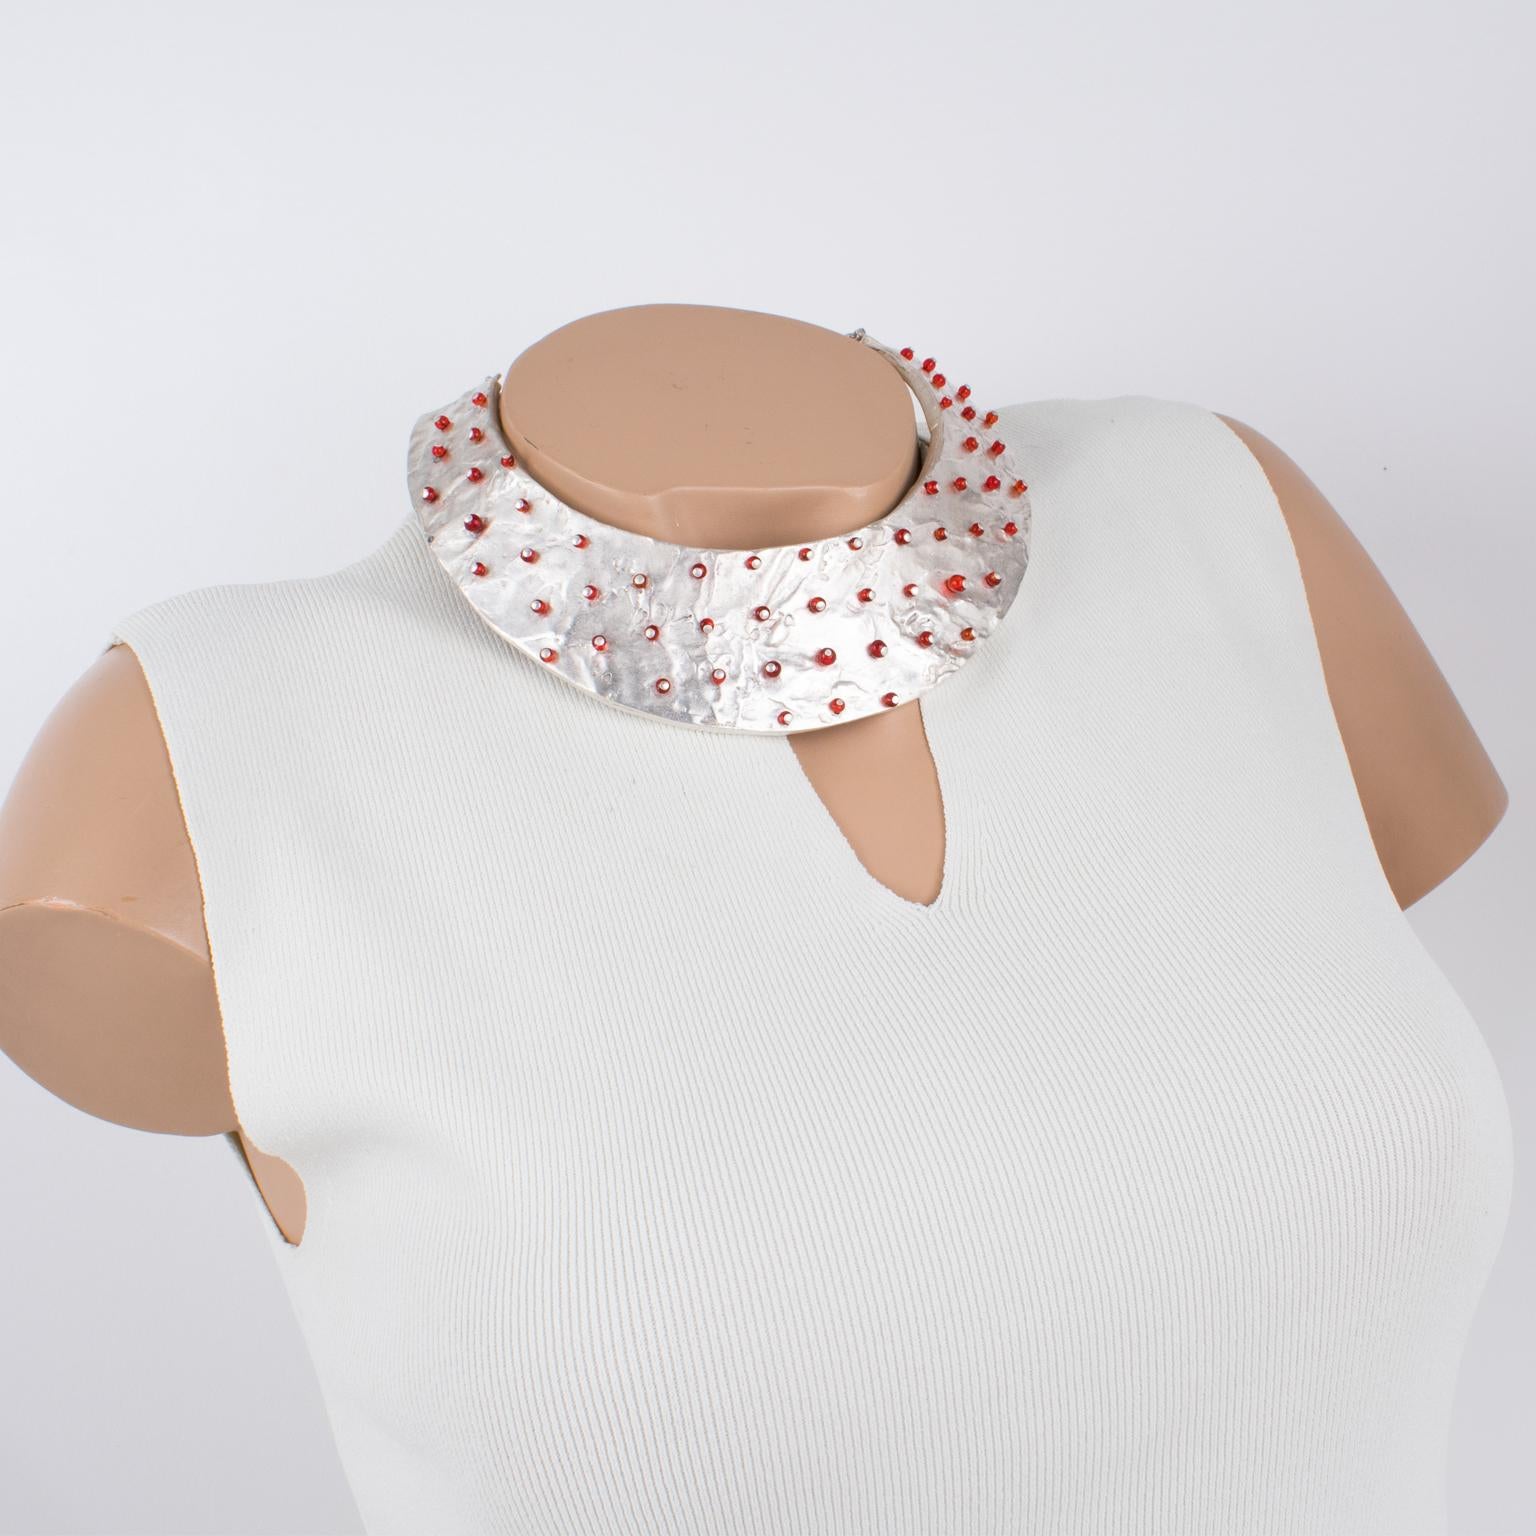 Nelly Biche de Bere, Paris, designed this stunning modernist silver plate rigid collar necklace in the 1990s. The chunky massive shape features a brutalist carved and hand-made feel design, topped with tiny ruby red glass beads, randomly displayed.